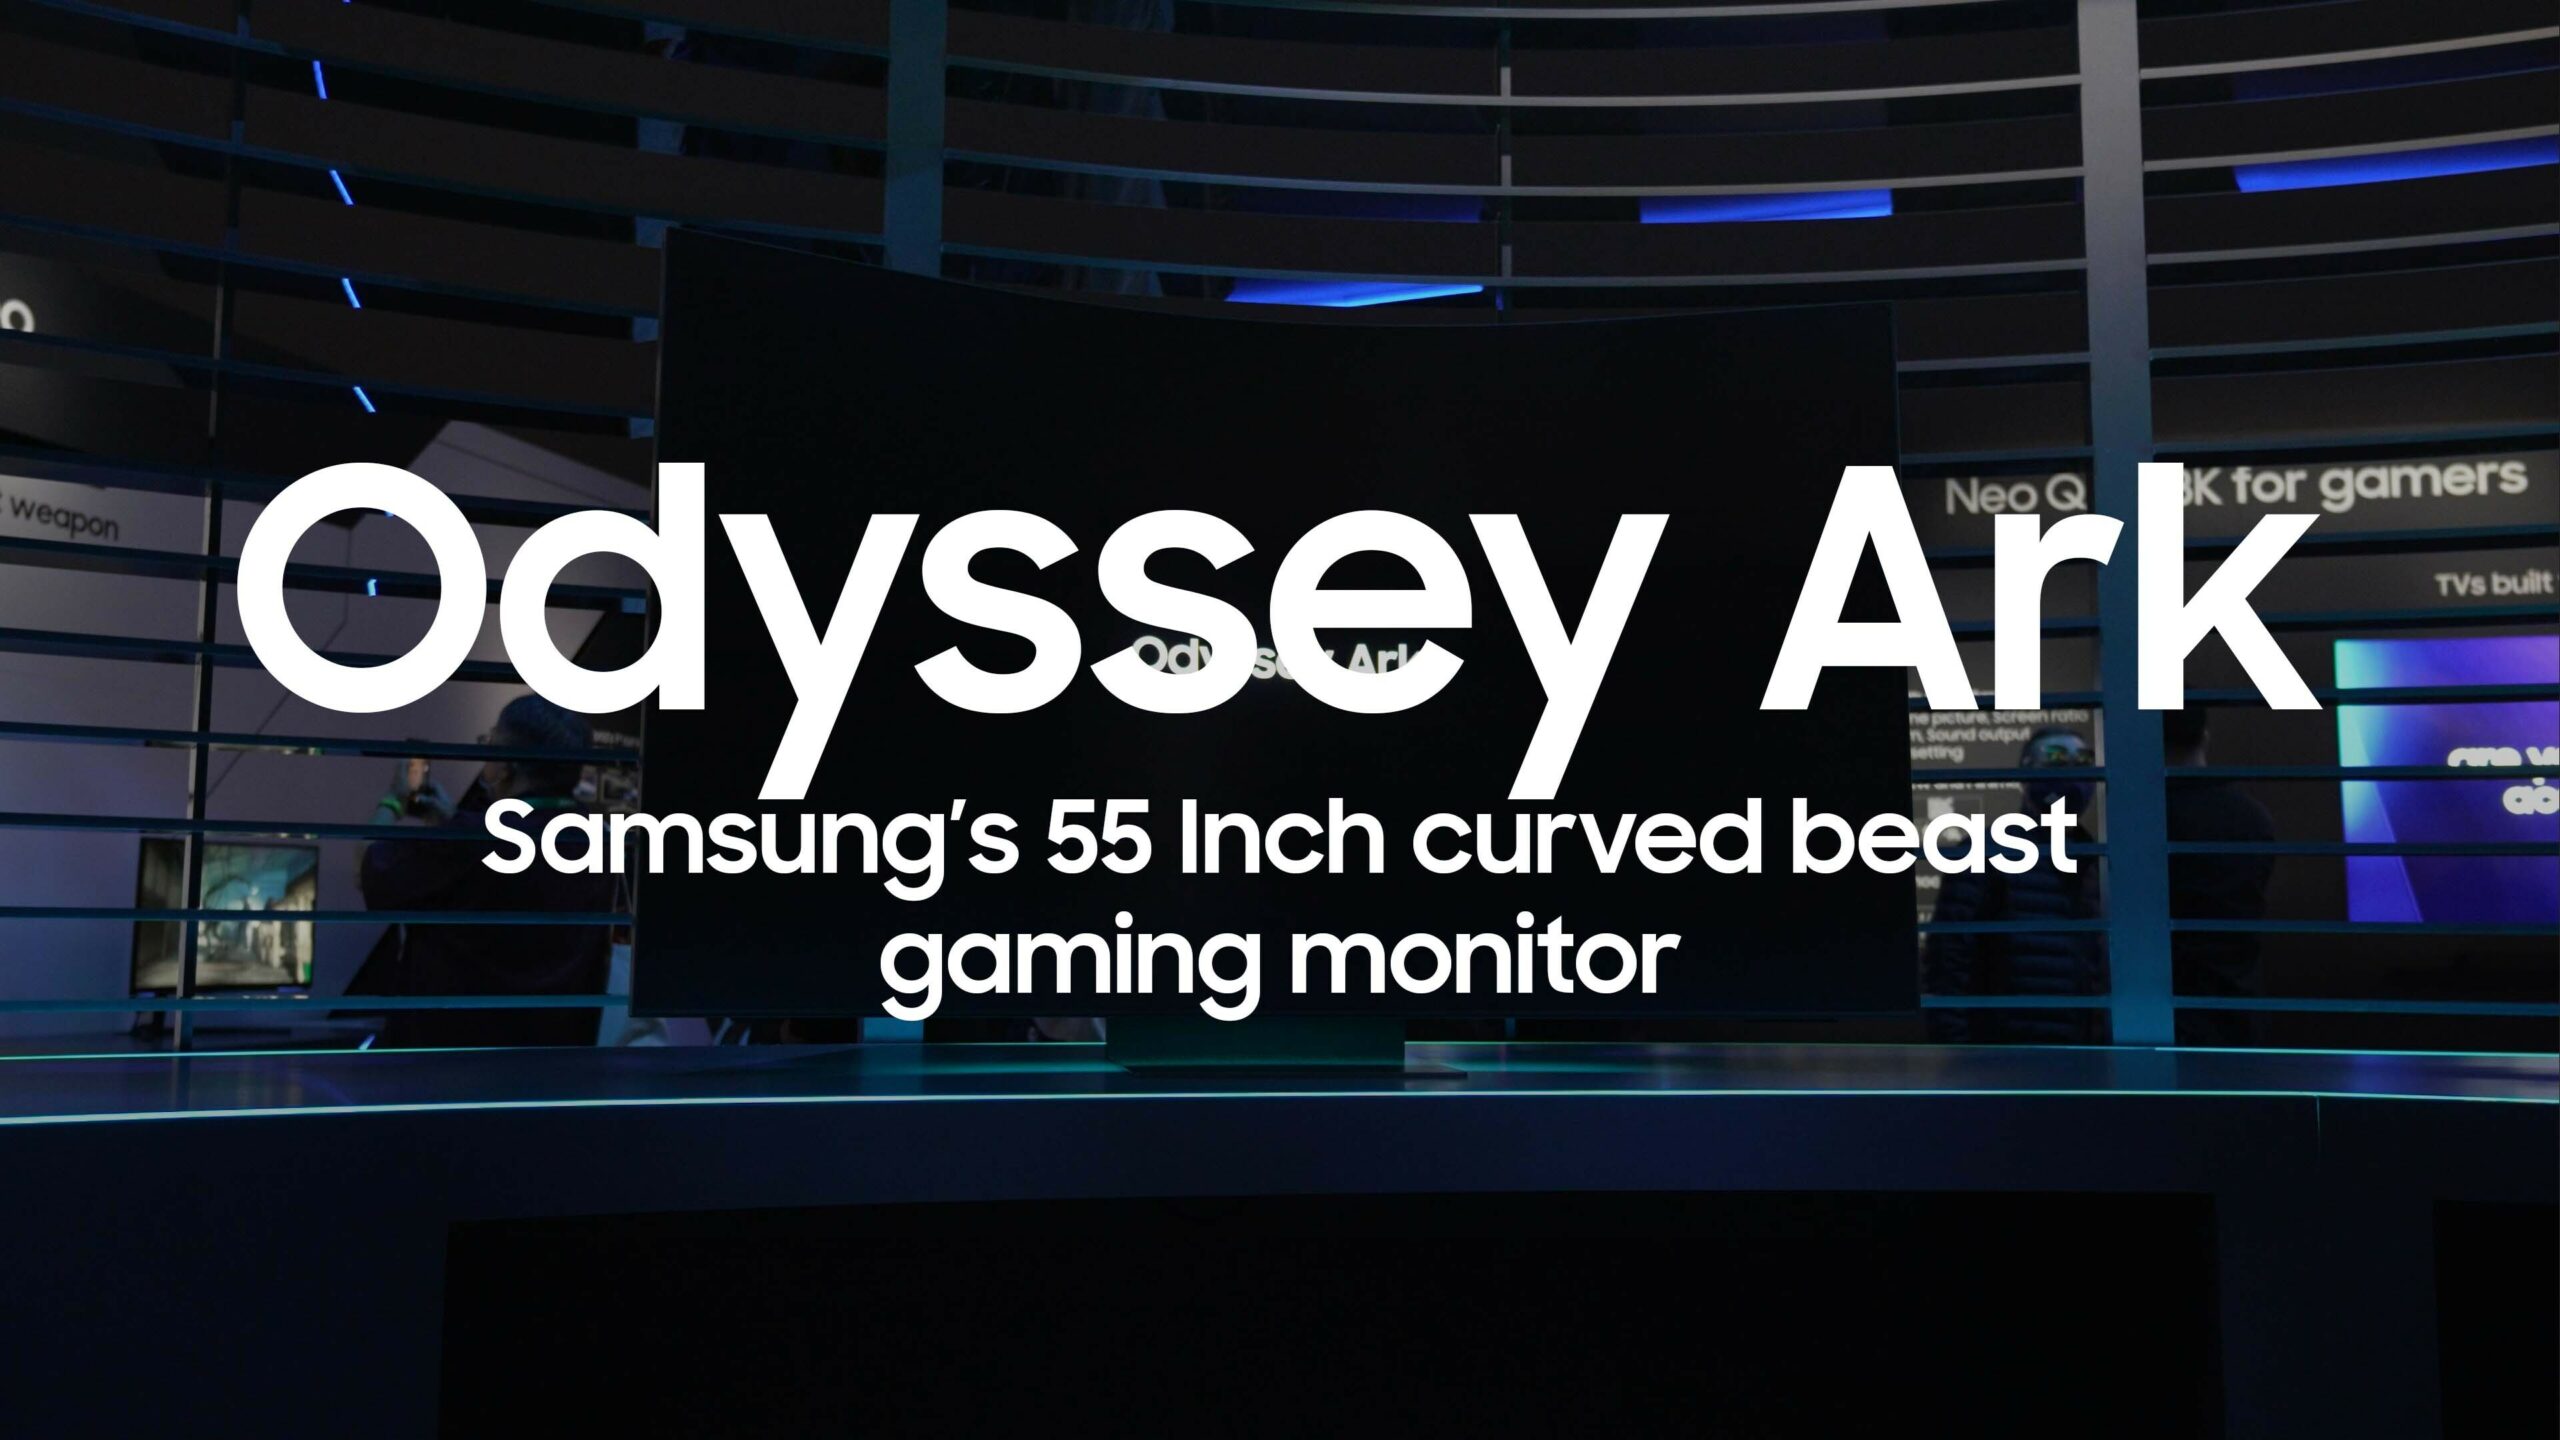 Samsung Odyssey Ark Review: This Massive Monitor Is a Gaming